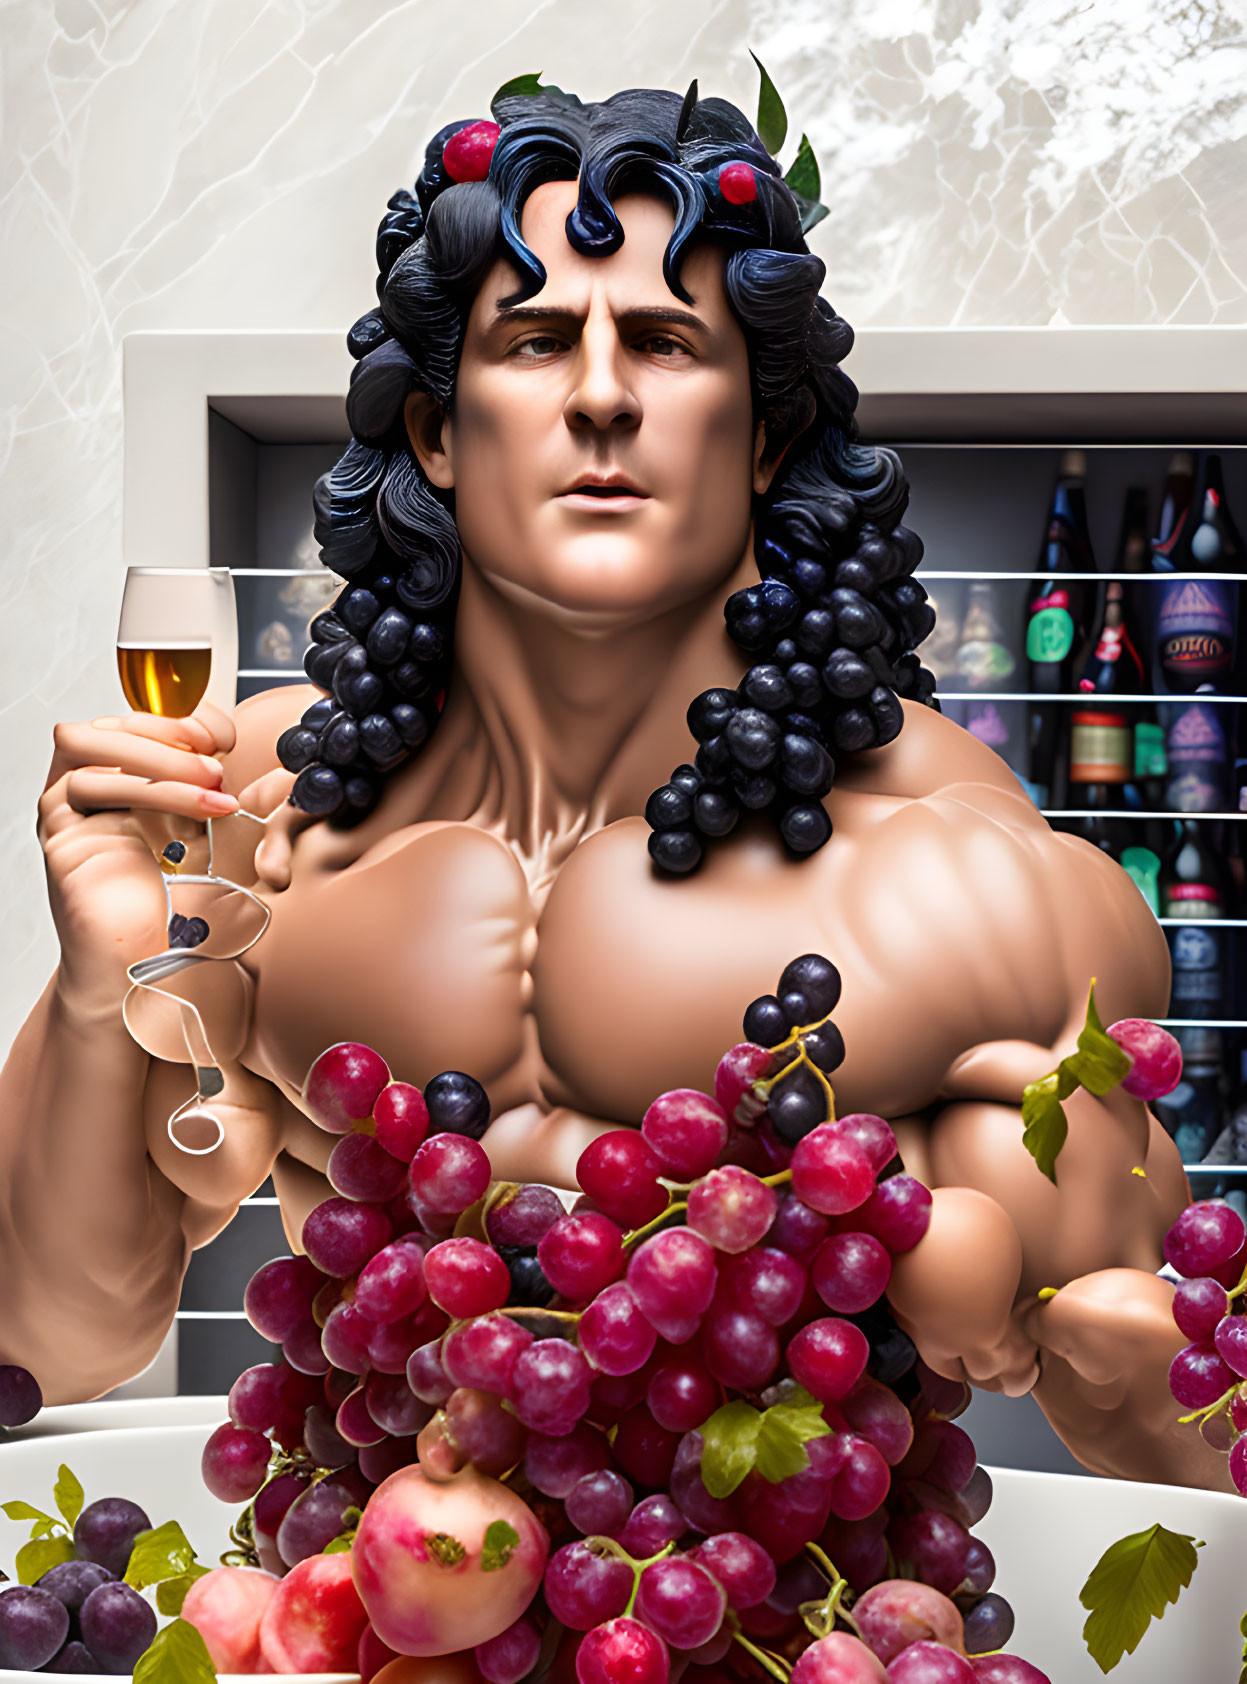 Vibrant illustration of muscular figure with grapevines, wine glass, and grapes.